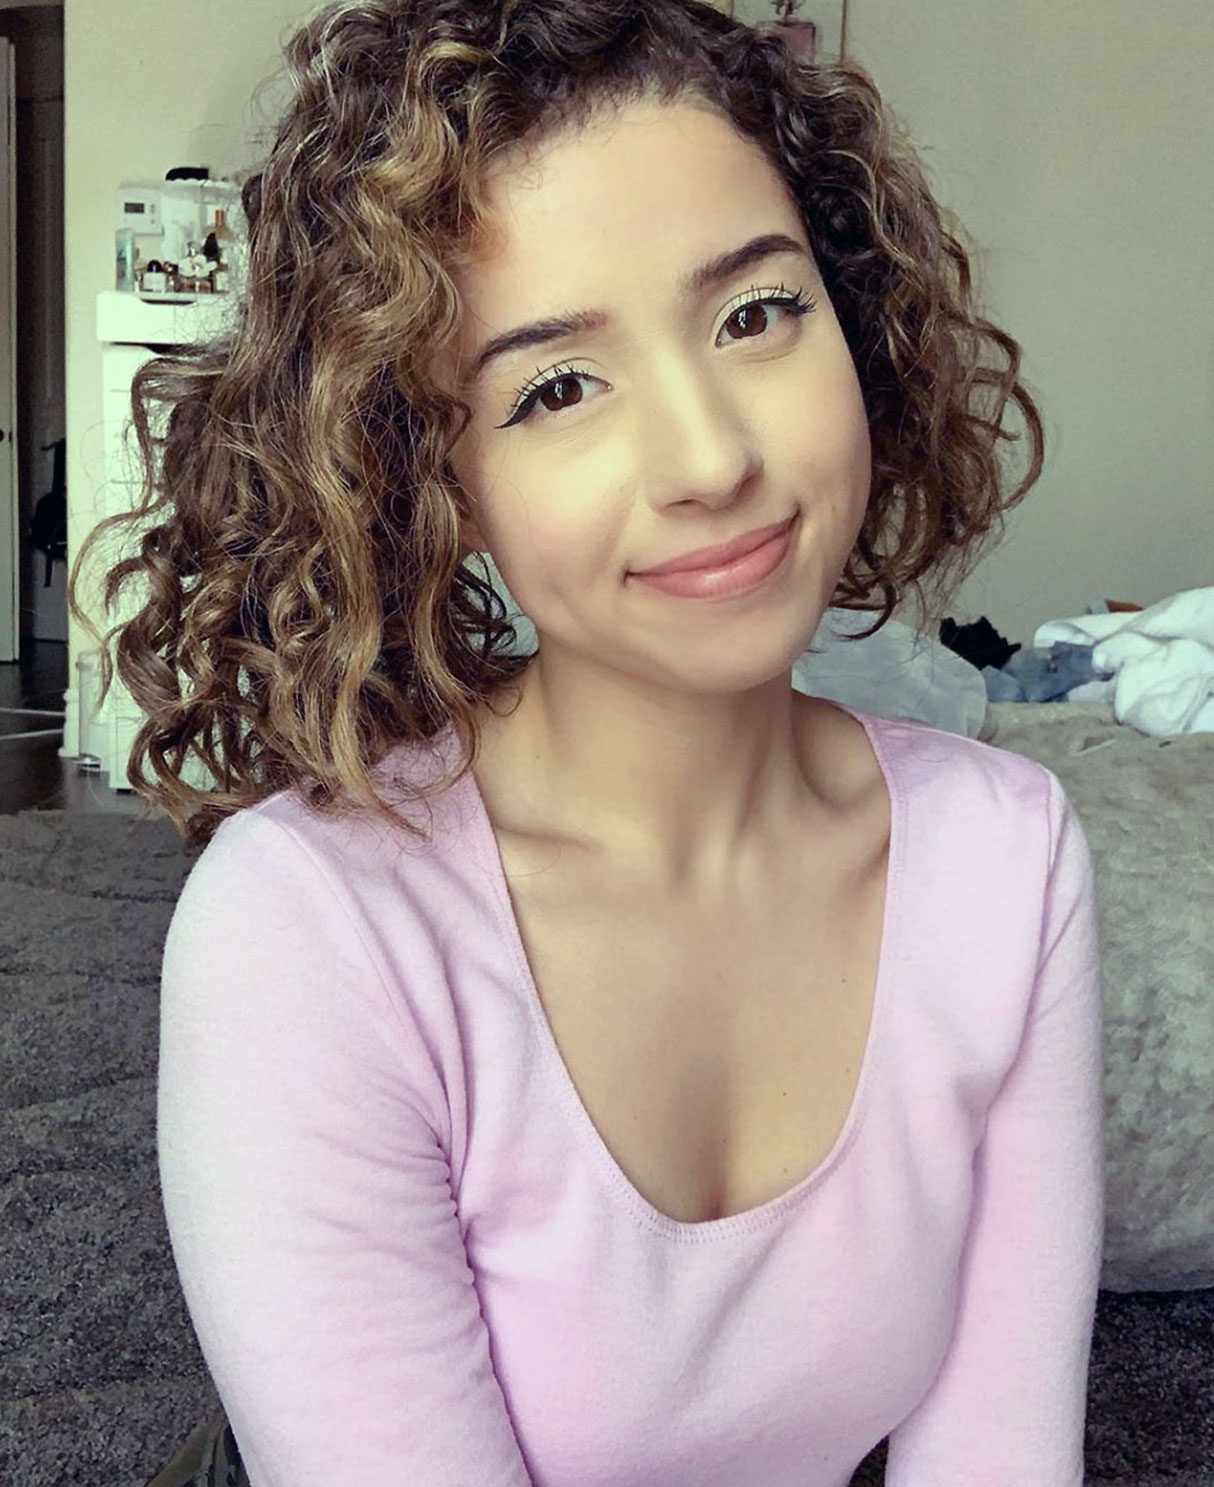 Pokimane naked sexy pussy topless nipples hot80